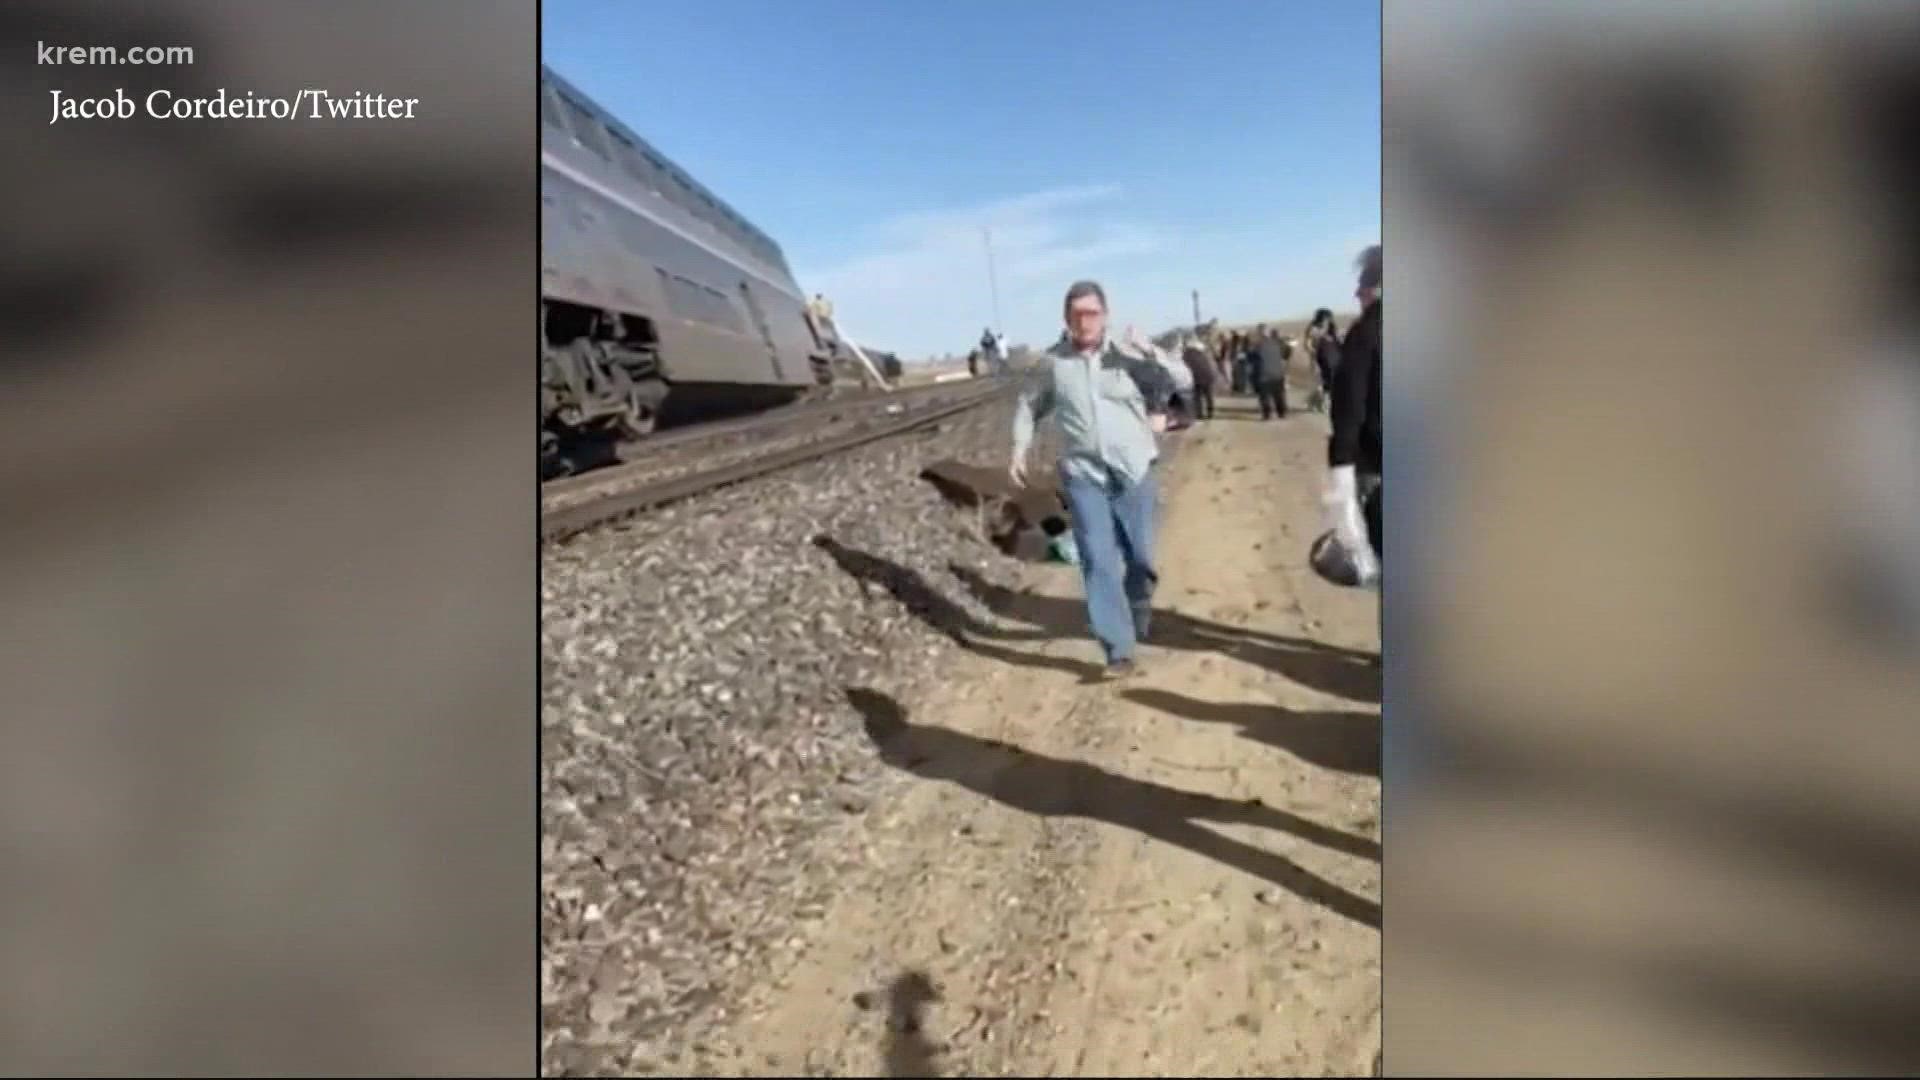 The train bound for Seattle derailed outside of Chester, Montana, according to Liberty County SO 911.